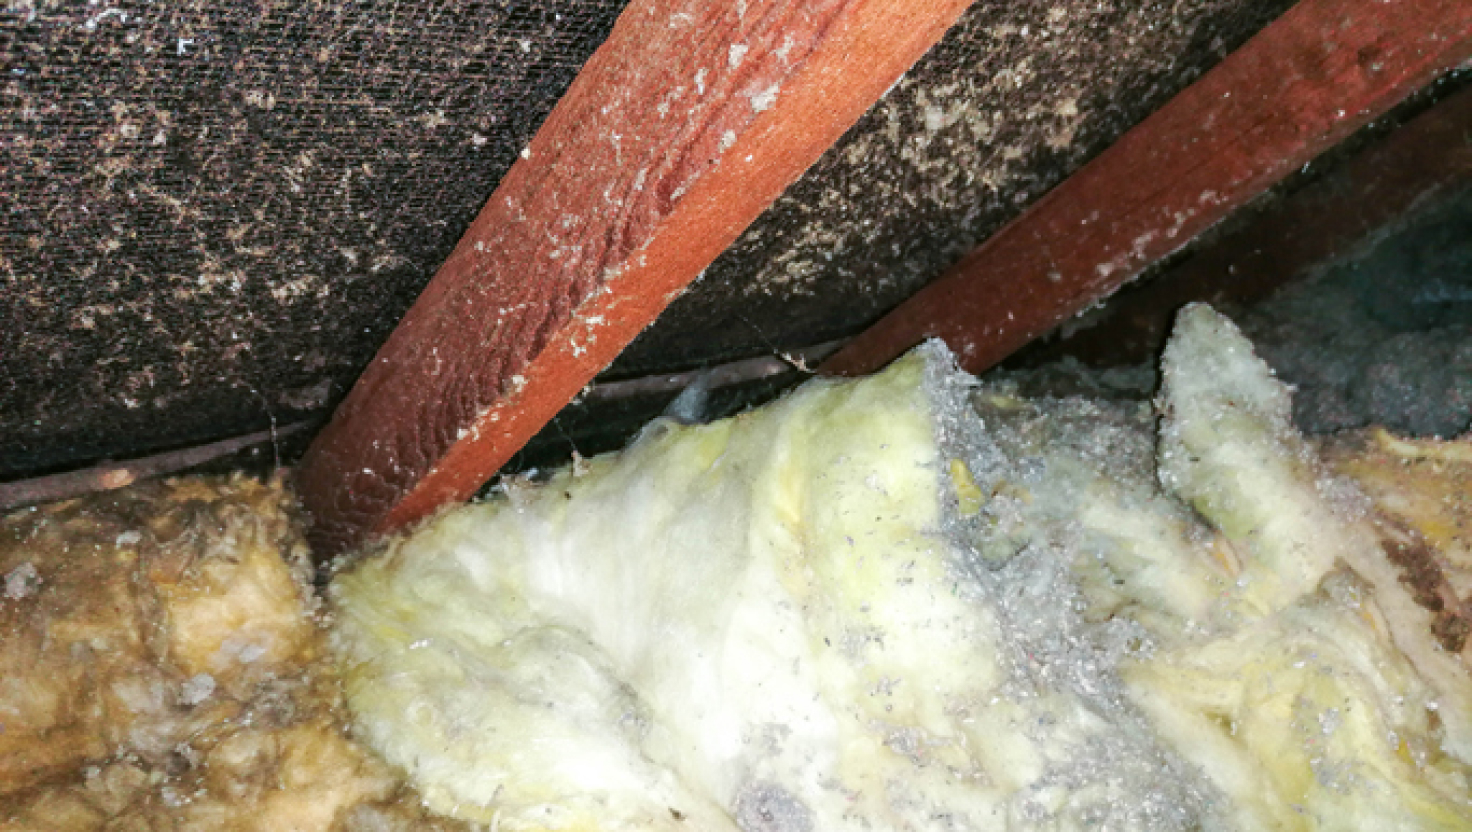 Asbestos In The Home - What You Need To Know - Asbestoswise in Victoria?